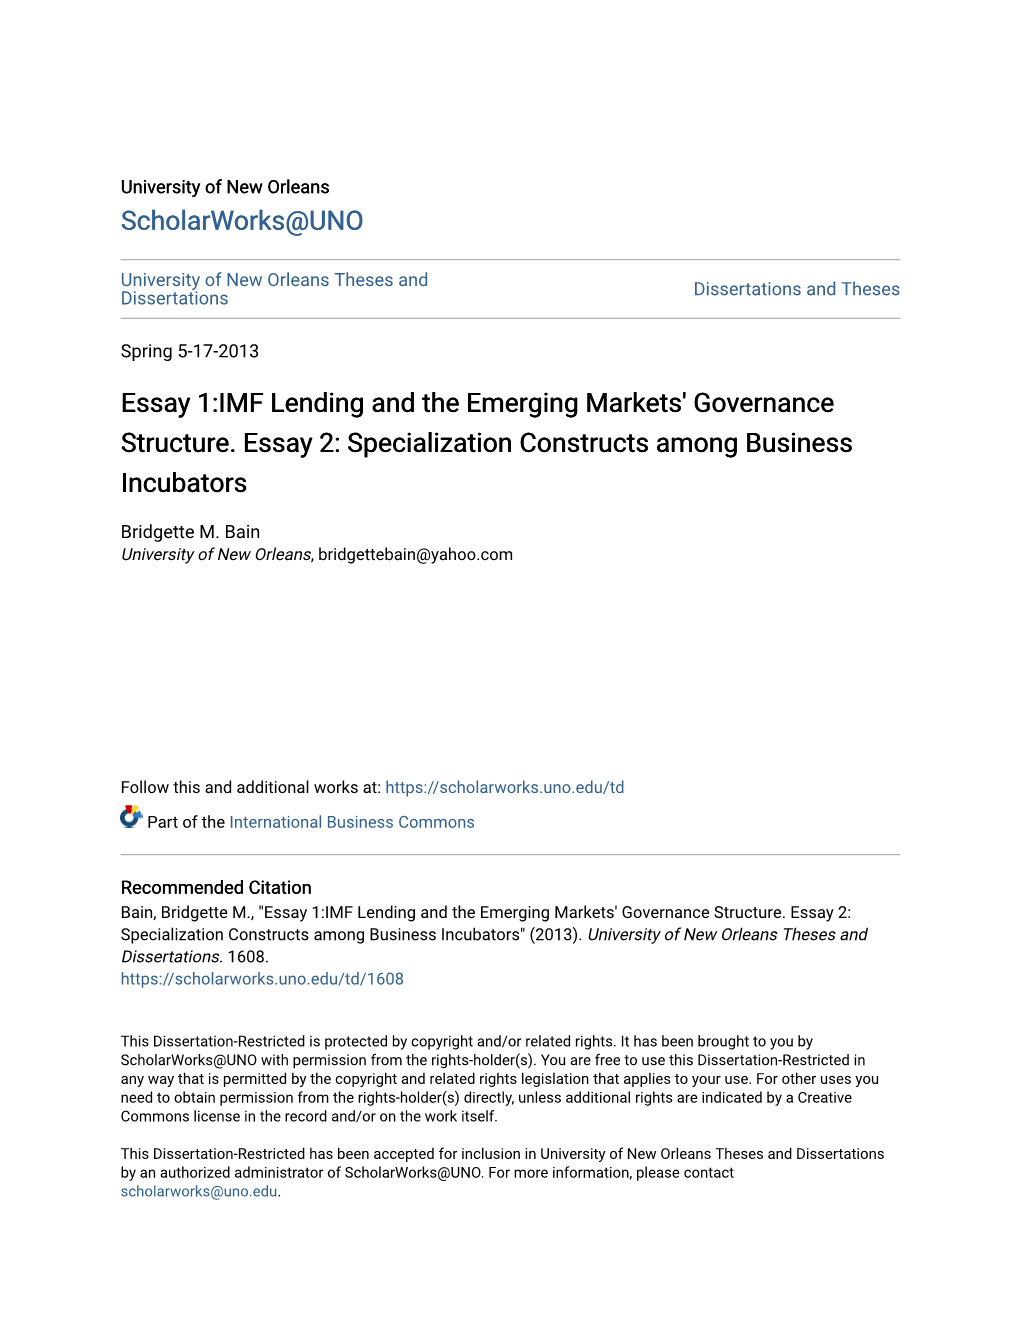 Essay 1:IMF Lending and the Emerging Markets' Governance Structure